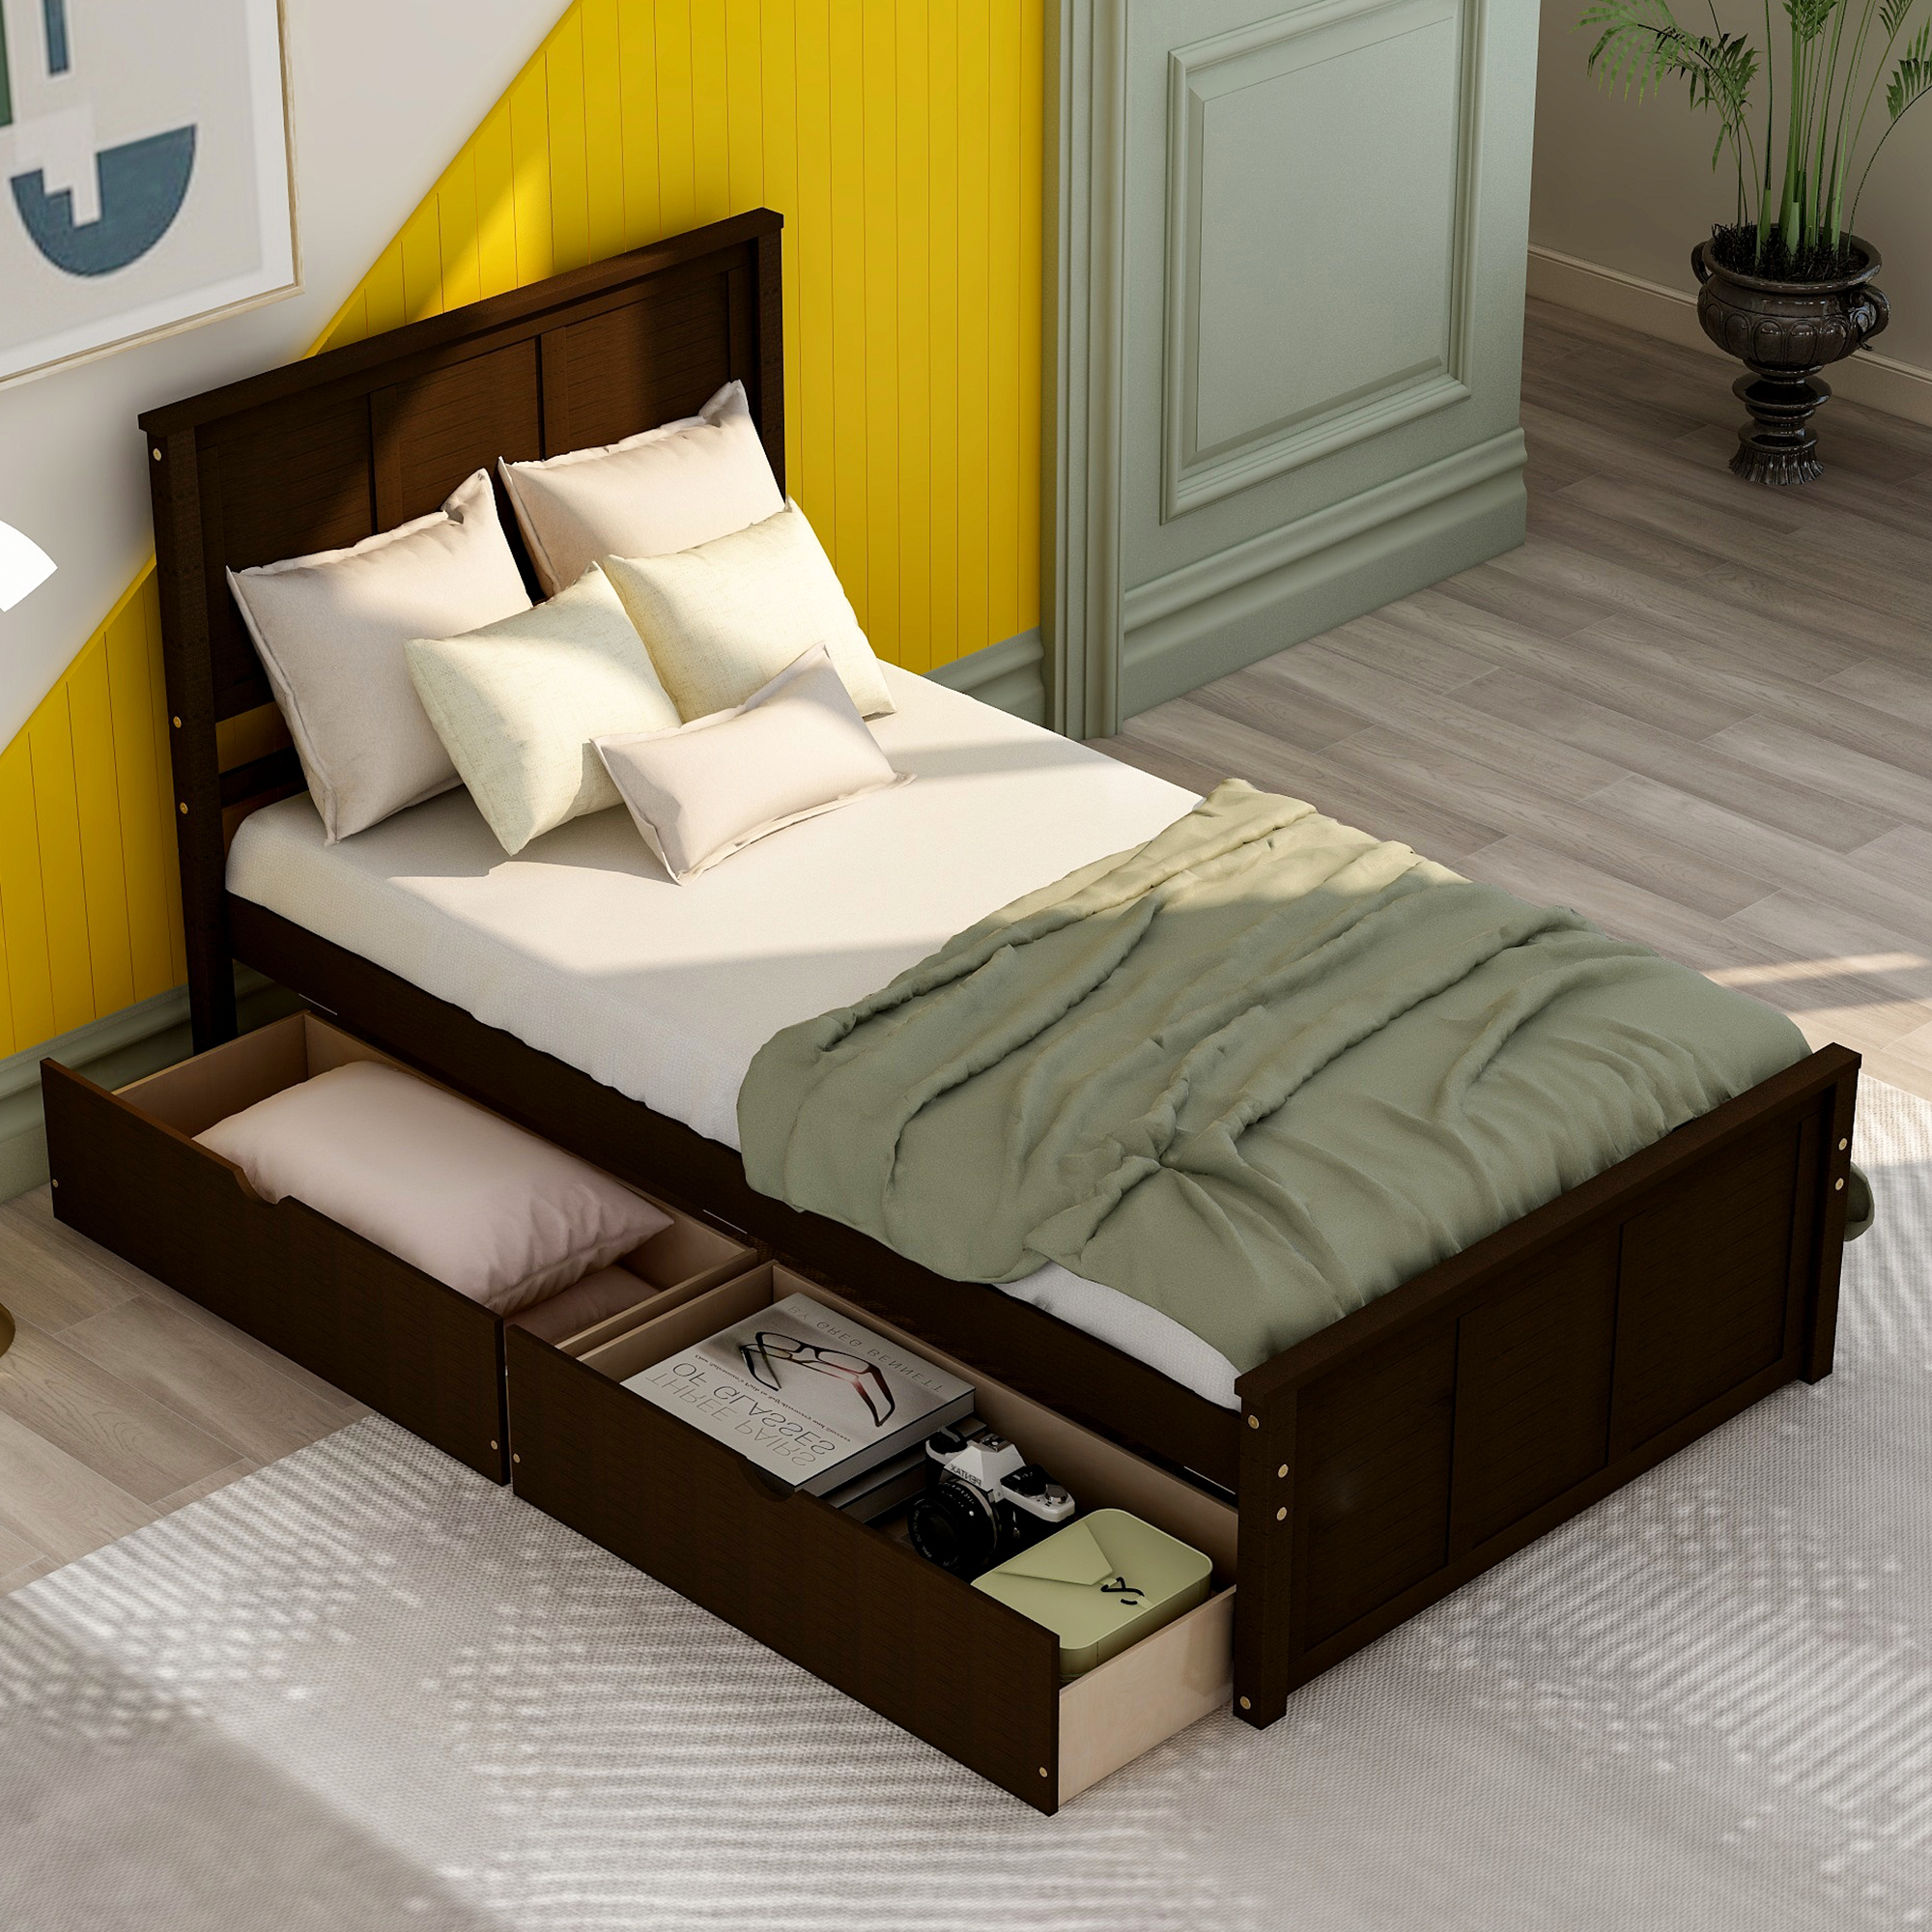 Euroco Wood Twin Platform Bed with Headboard & 2 Storage Drawers for Kids, Espresso - image 2 of 10